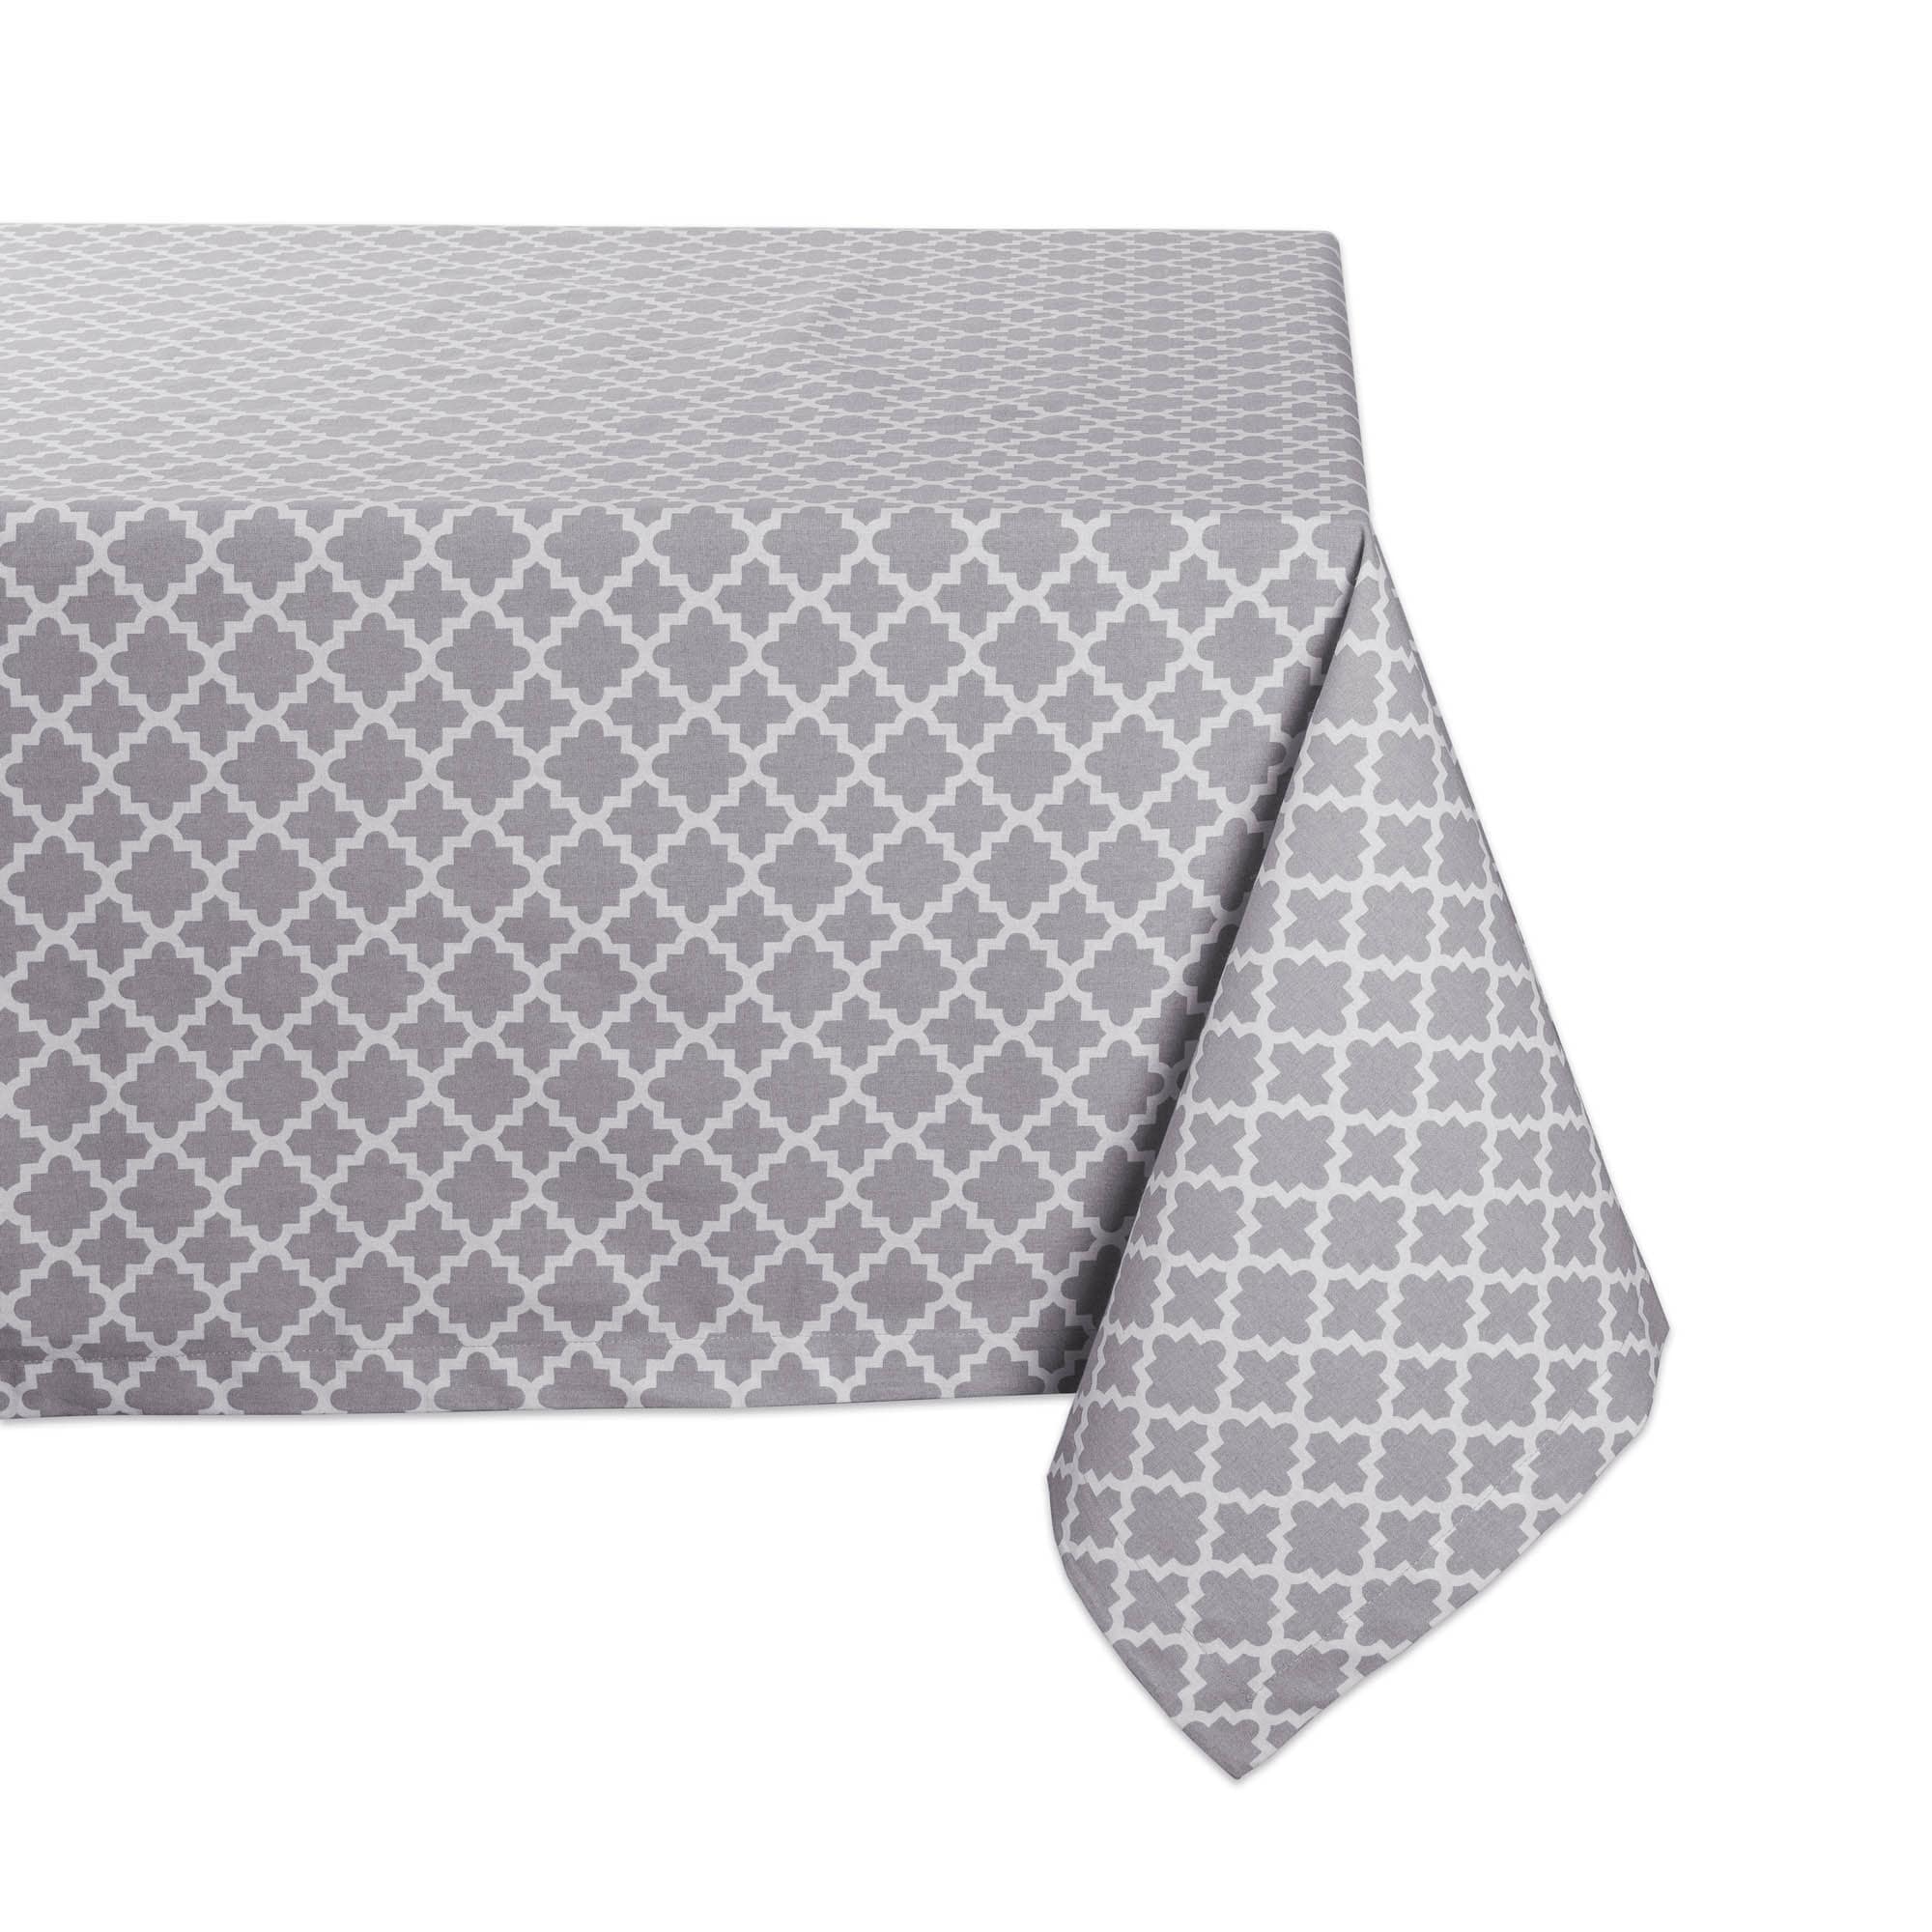 DII Lattice Table Topper - On Sale - Bed Bath & Beyond - 28529575